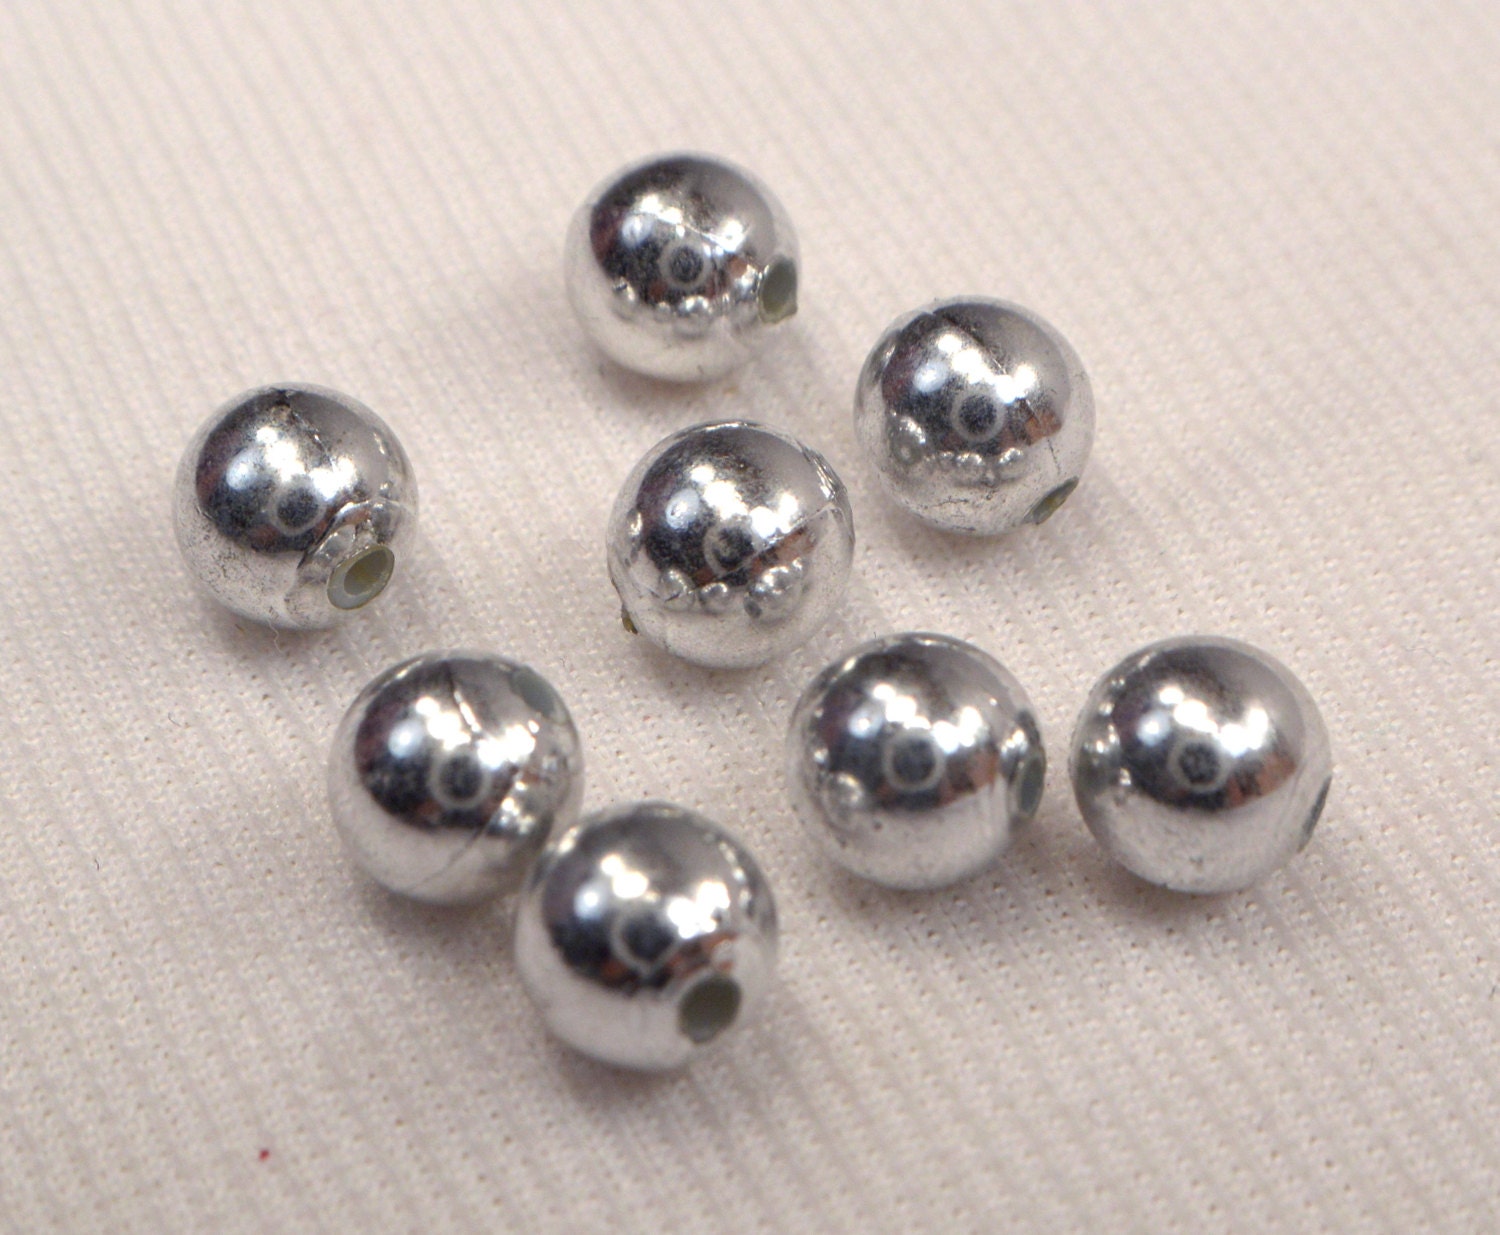 Silver Beads, 15 Loose Silver Acrylic Beads, Silver Ball Beads, Beads